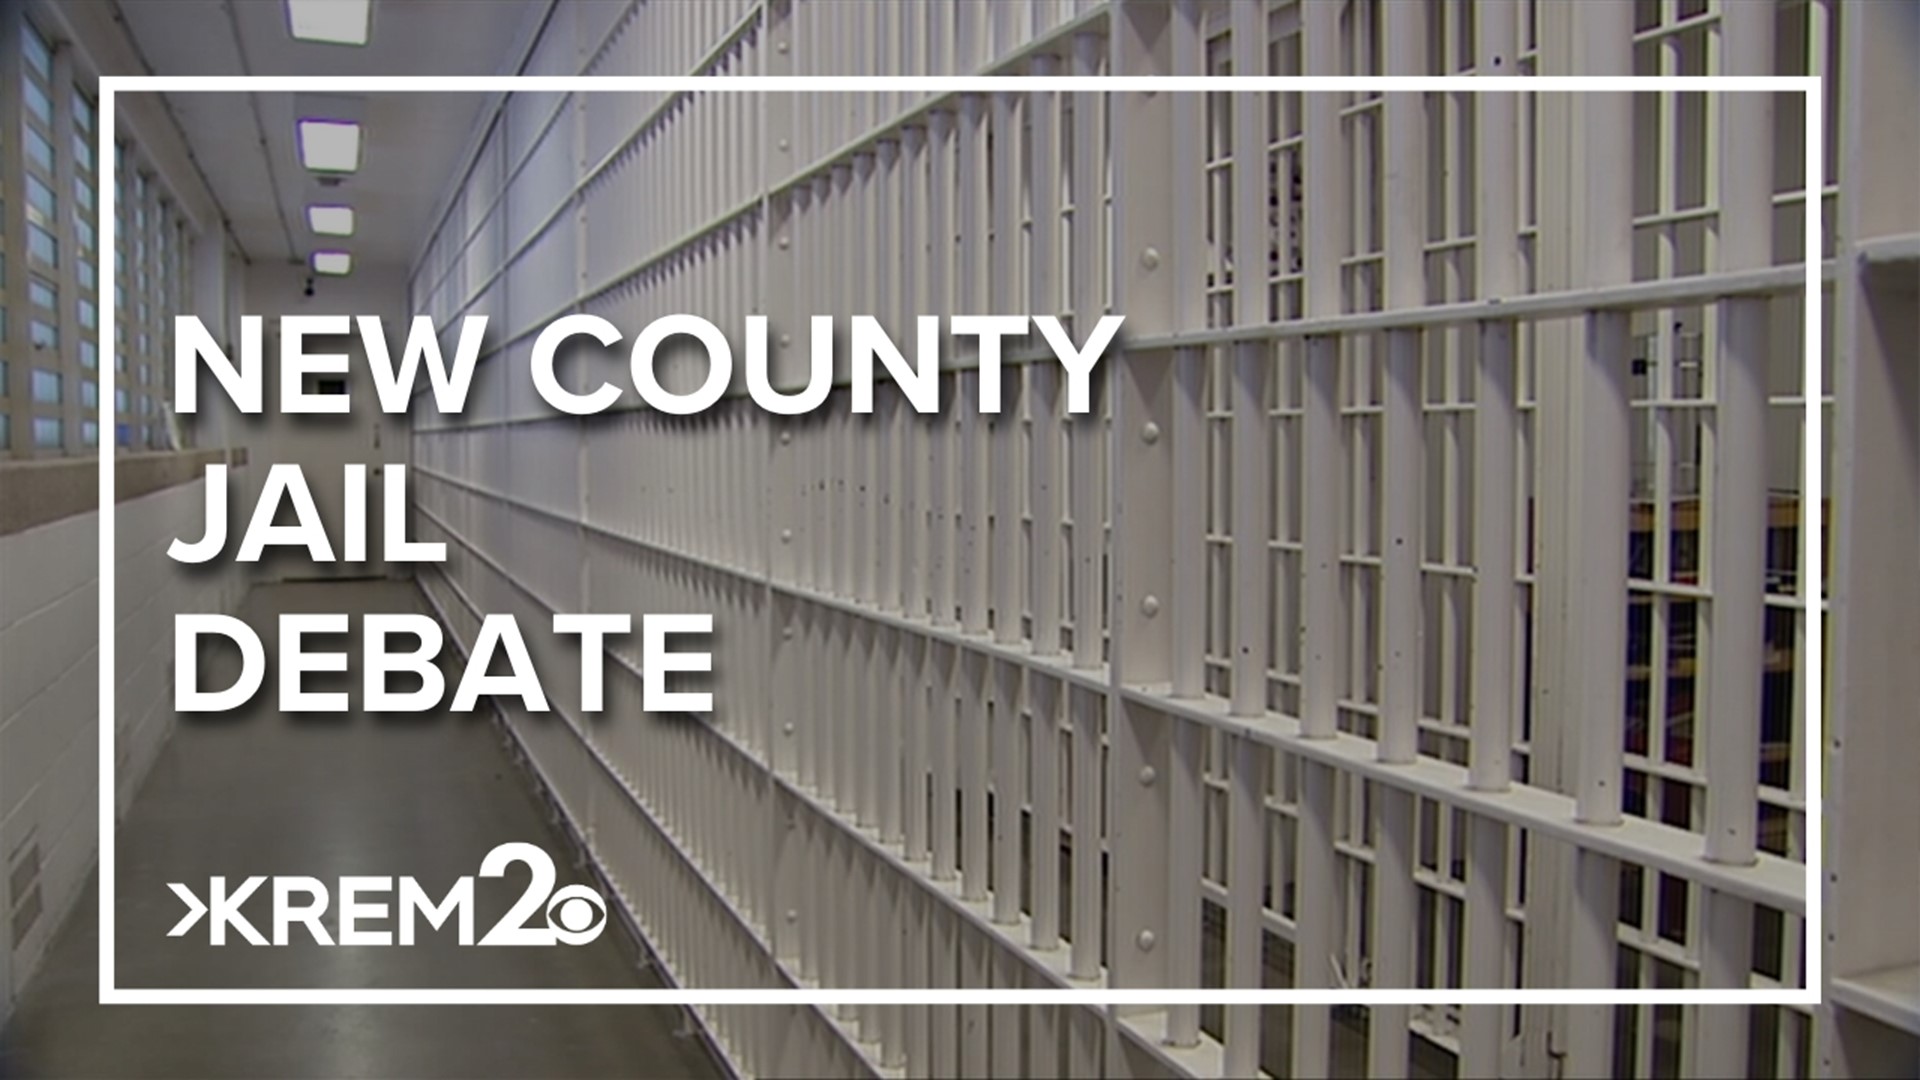 City officials are encouraging city residents to approve Measure No. 1 for a new county jail.